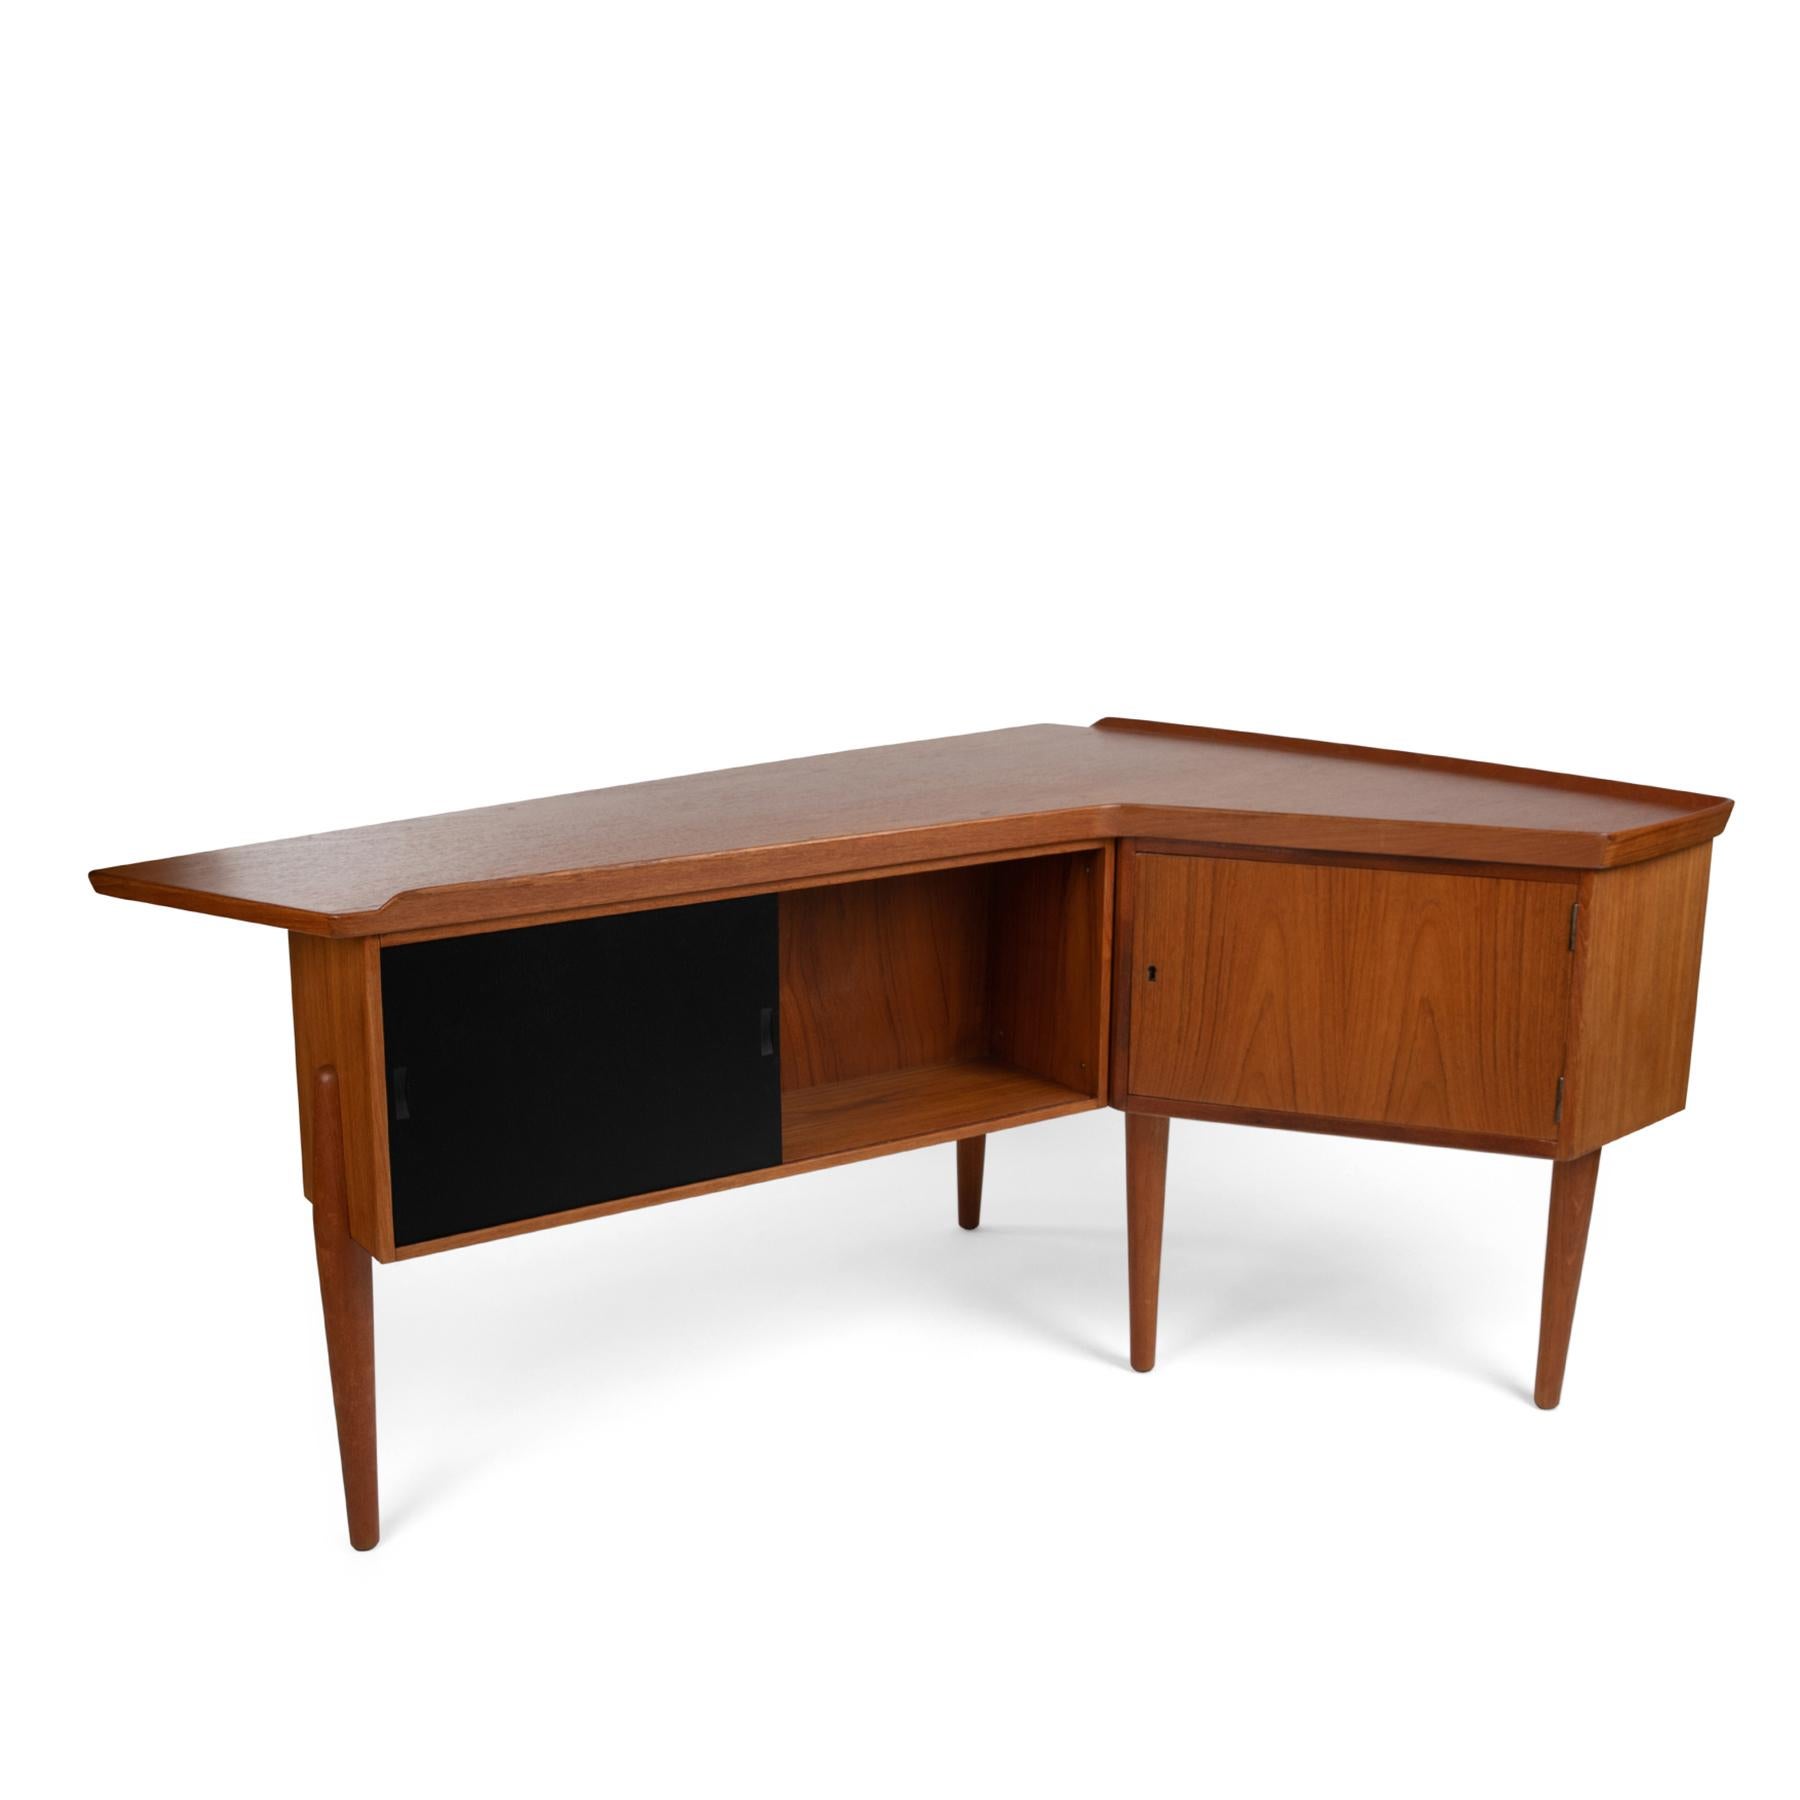 Arne Hovmand-Olsen teak, brass and lacquered desk, circa early 1960s. This sculptural example has three drawers with inset round teak pulls on the front, sliding ebonized door and additional storage on the back. The unusual boomerang form lends